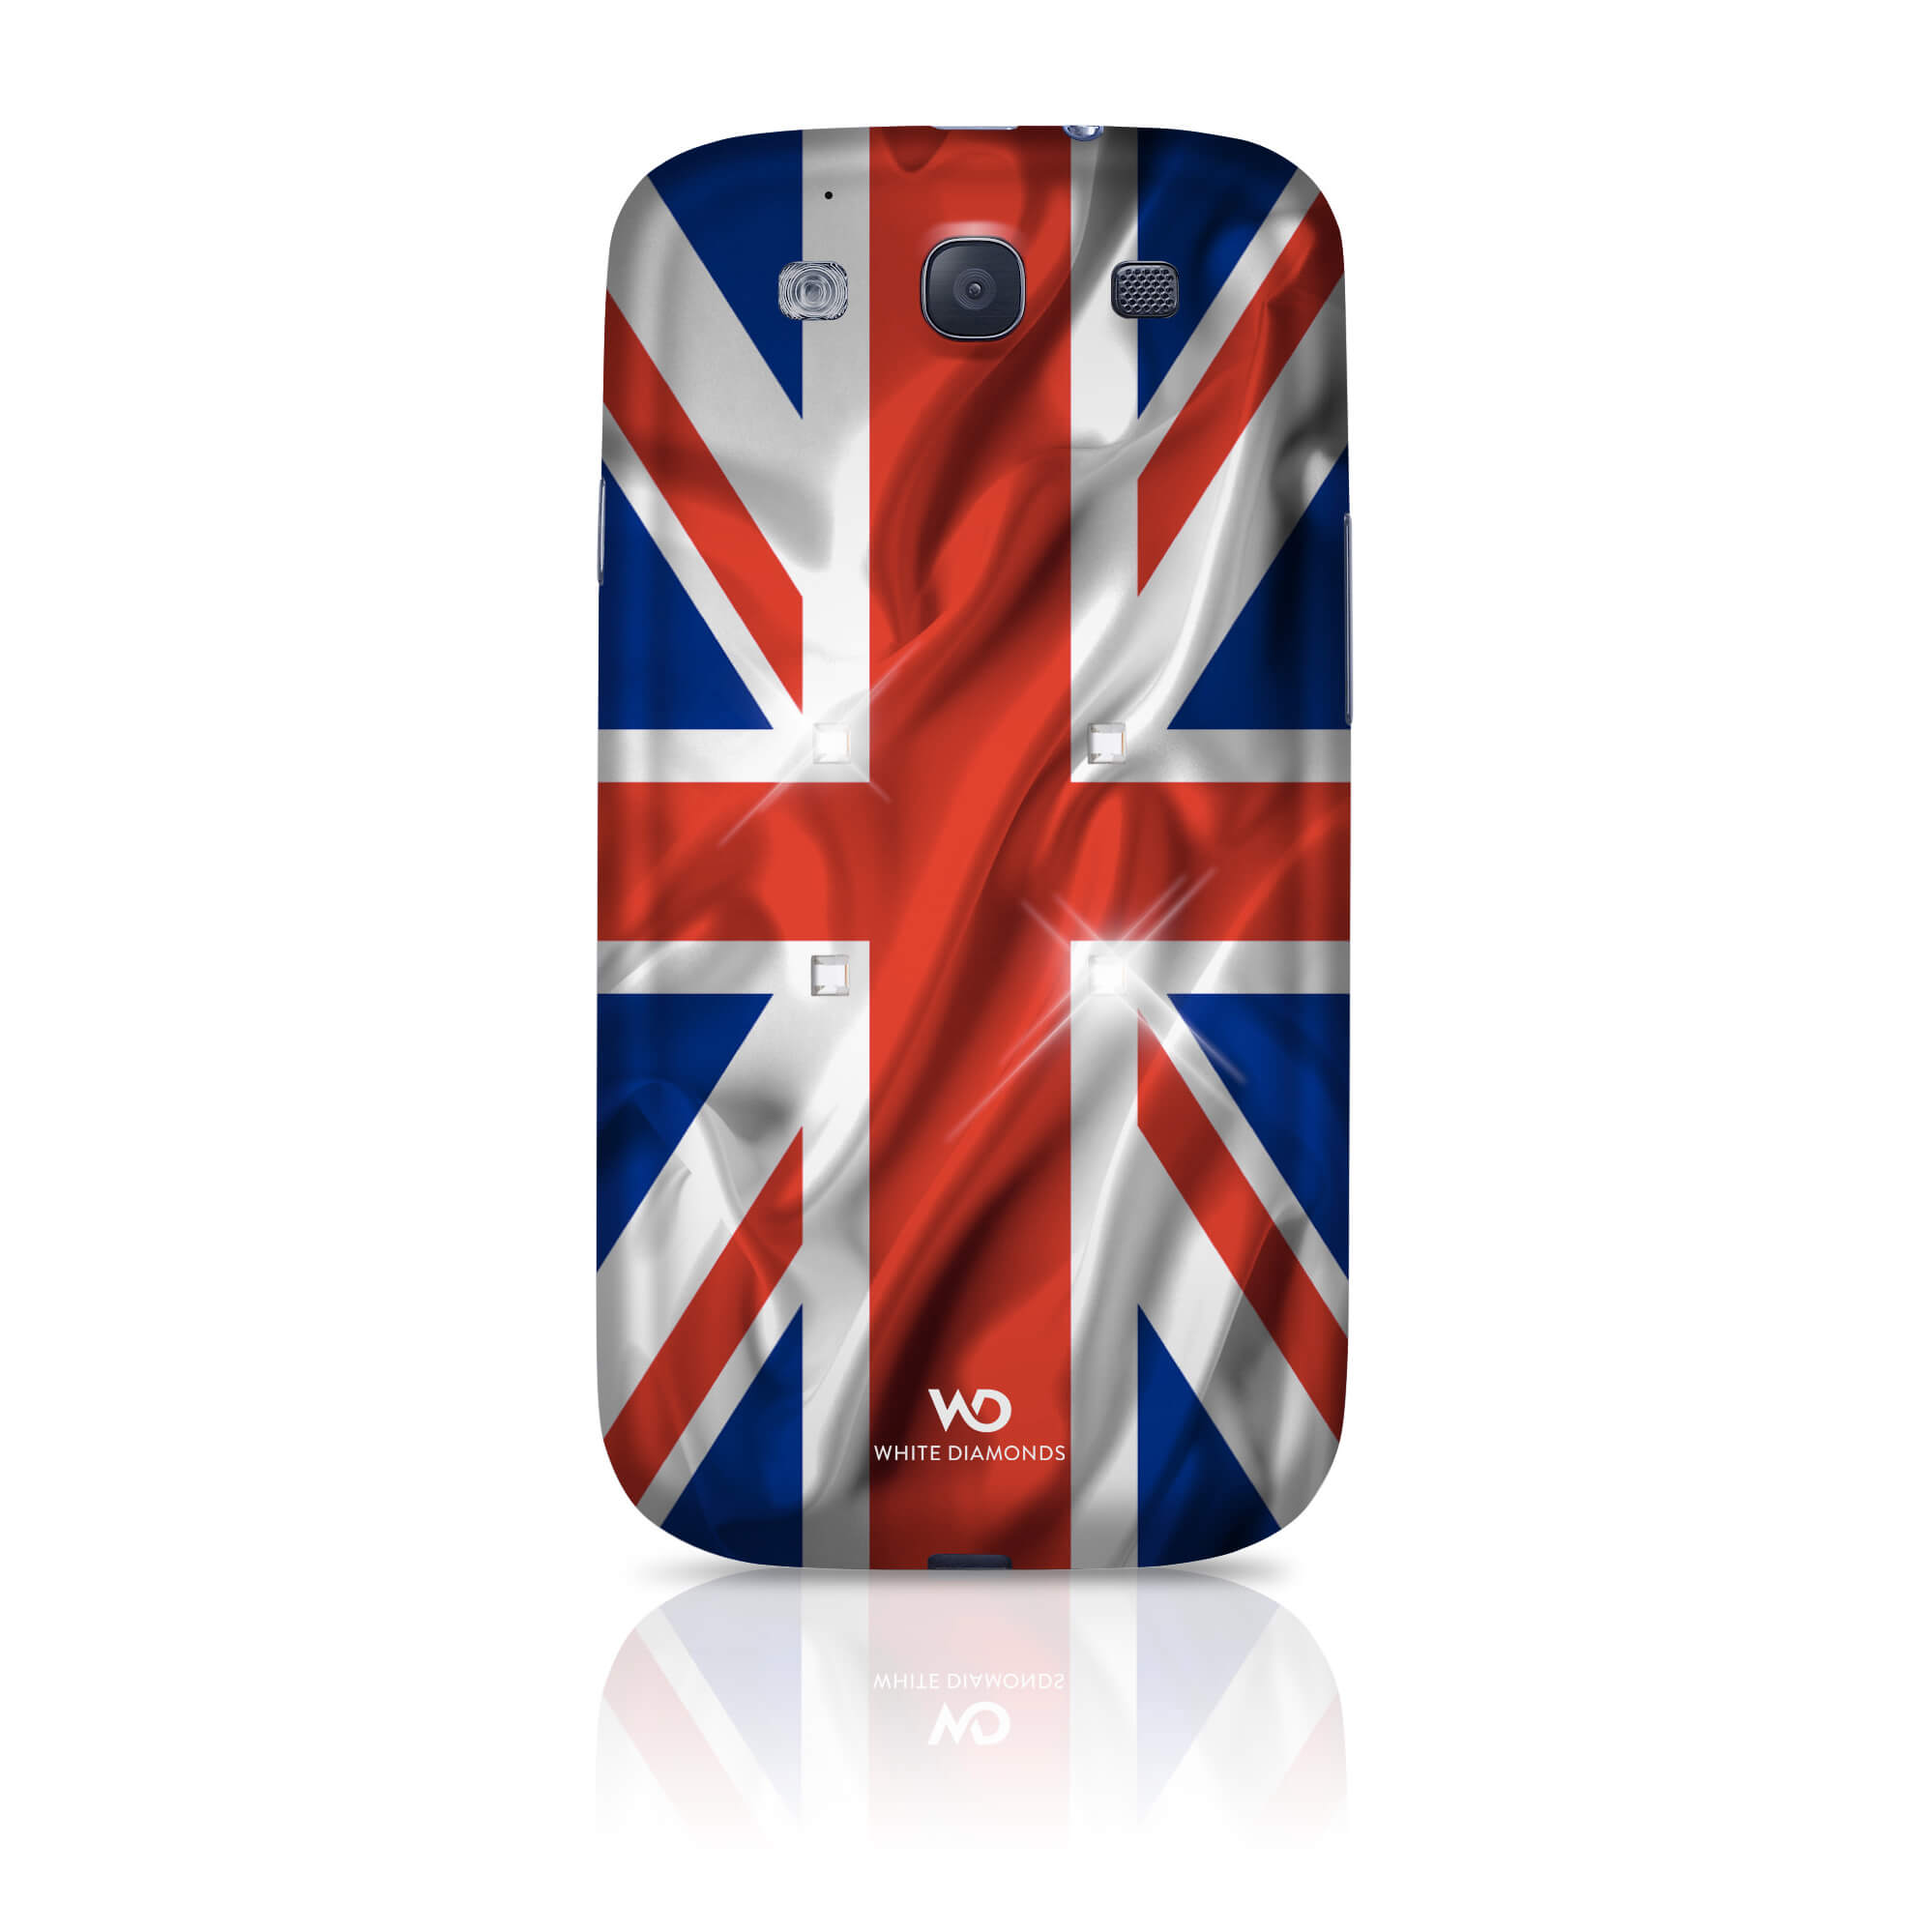 Flag UK Mobile Phone Cover fo r Samsung Galaxy S III, red